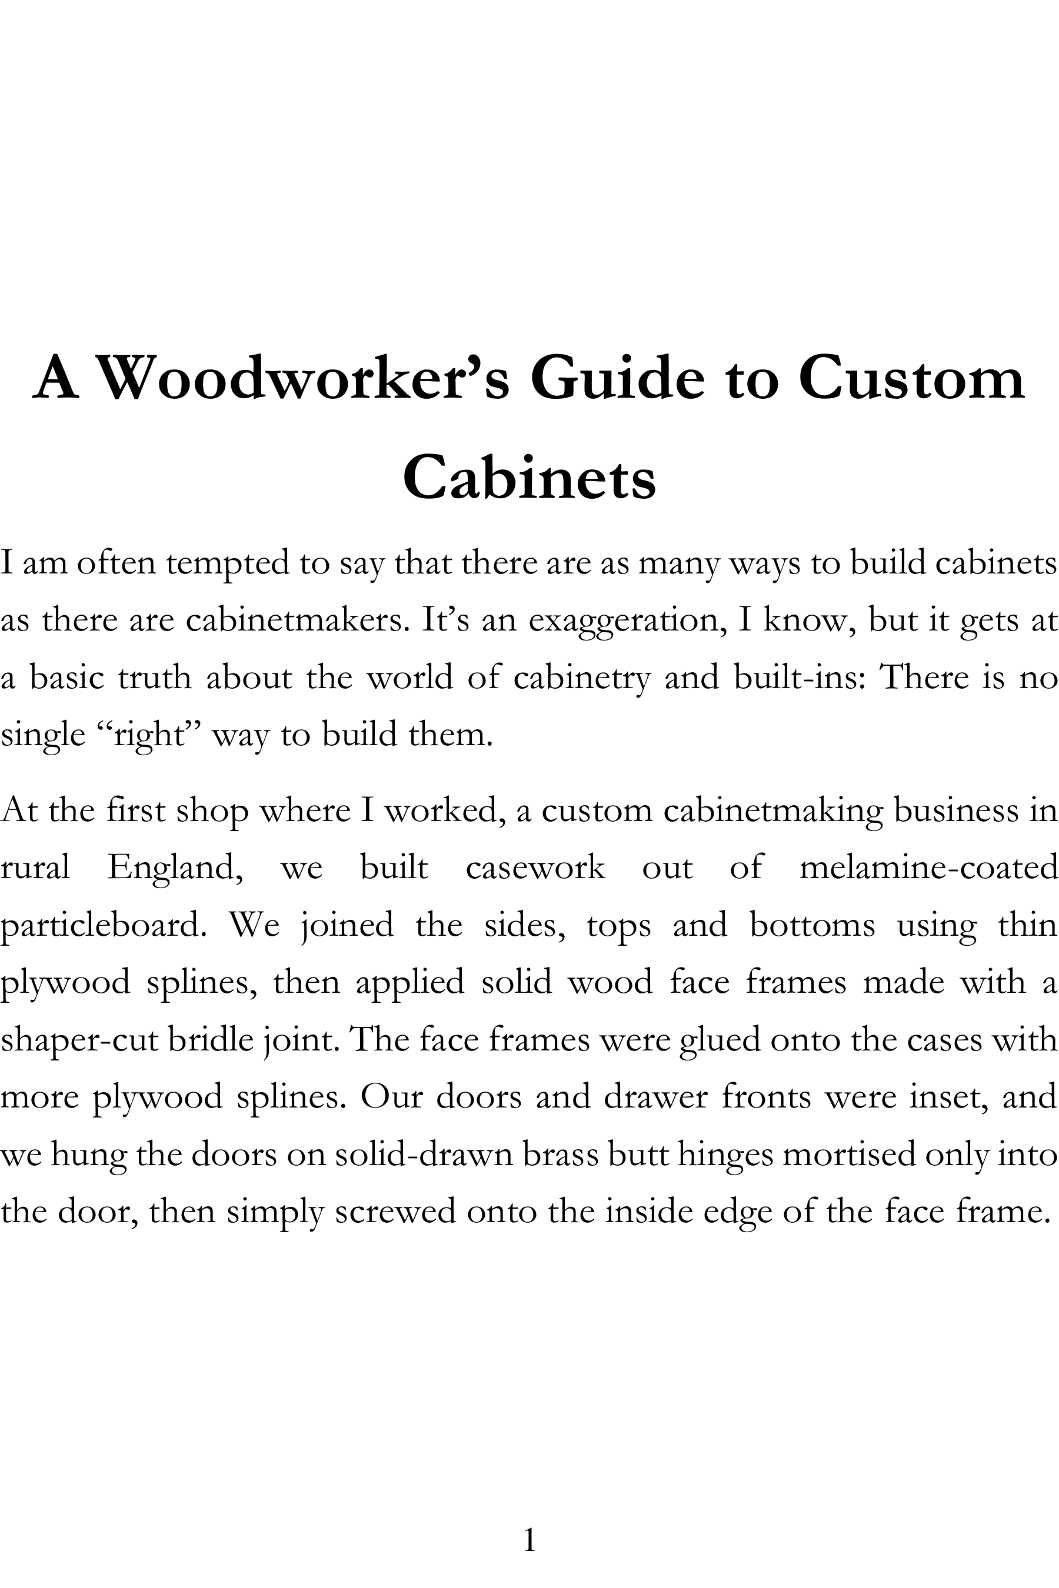 Furniture Design and Construction A Woodworkers Guide to Furniture Making - photo 2